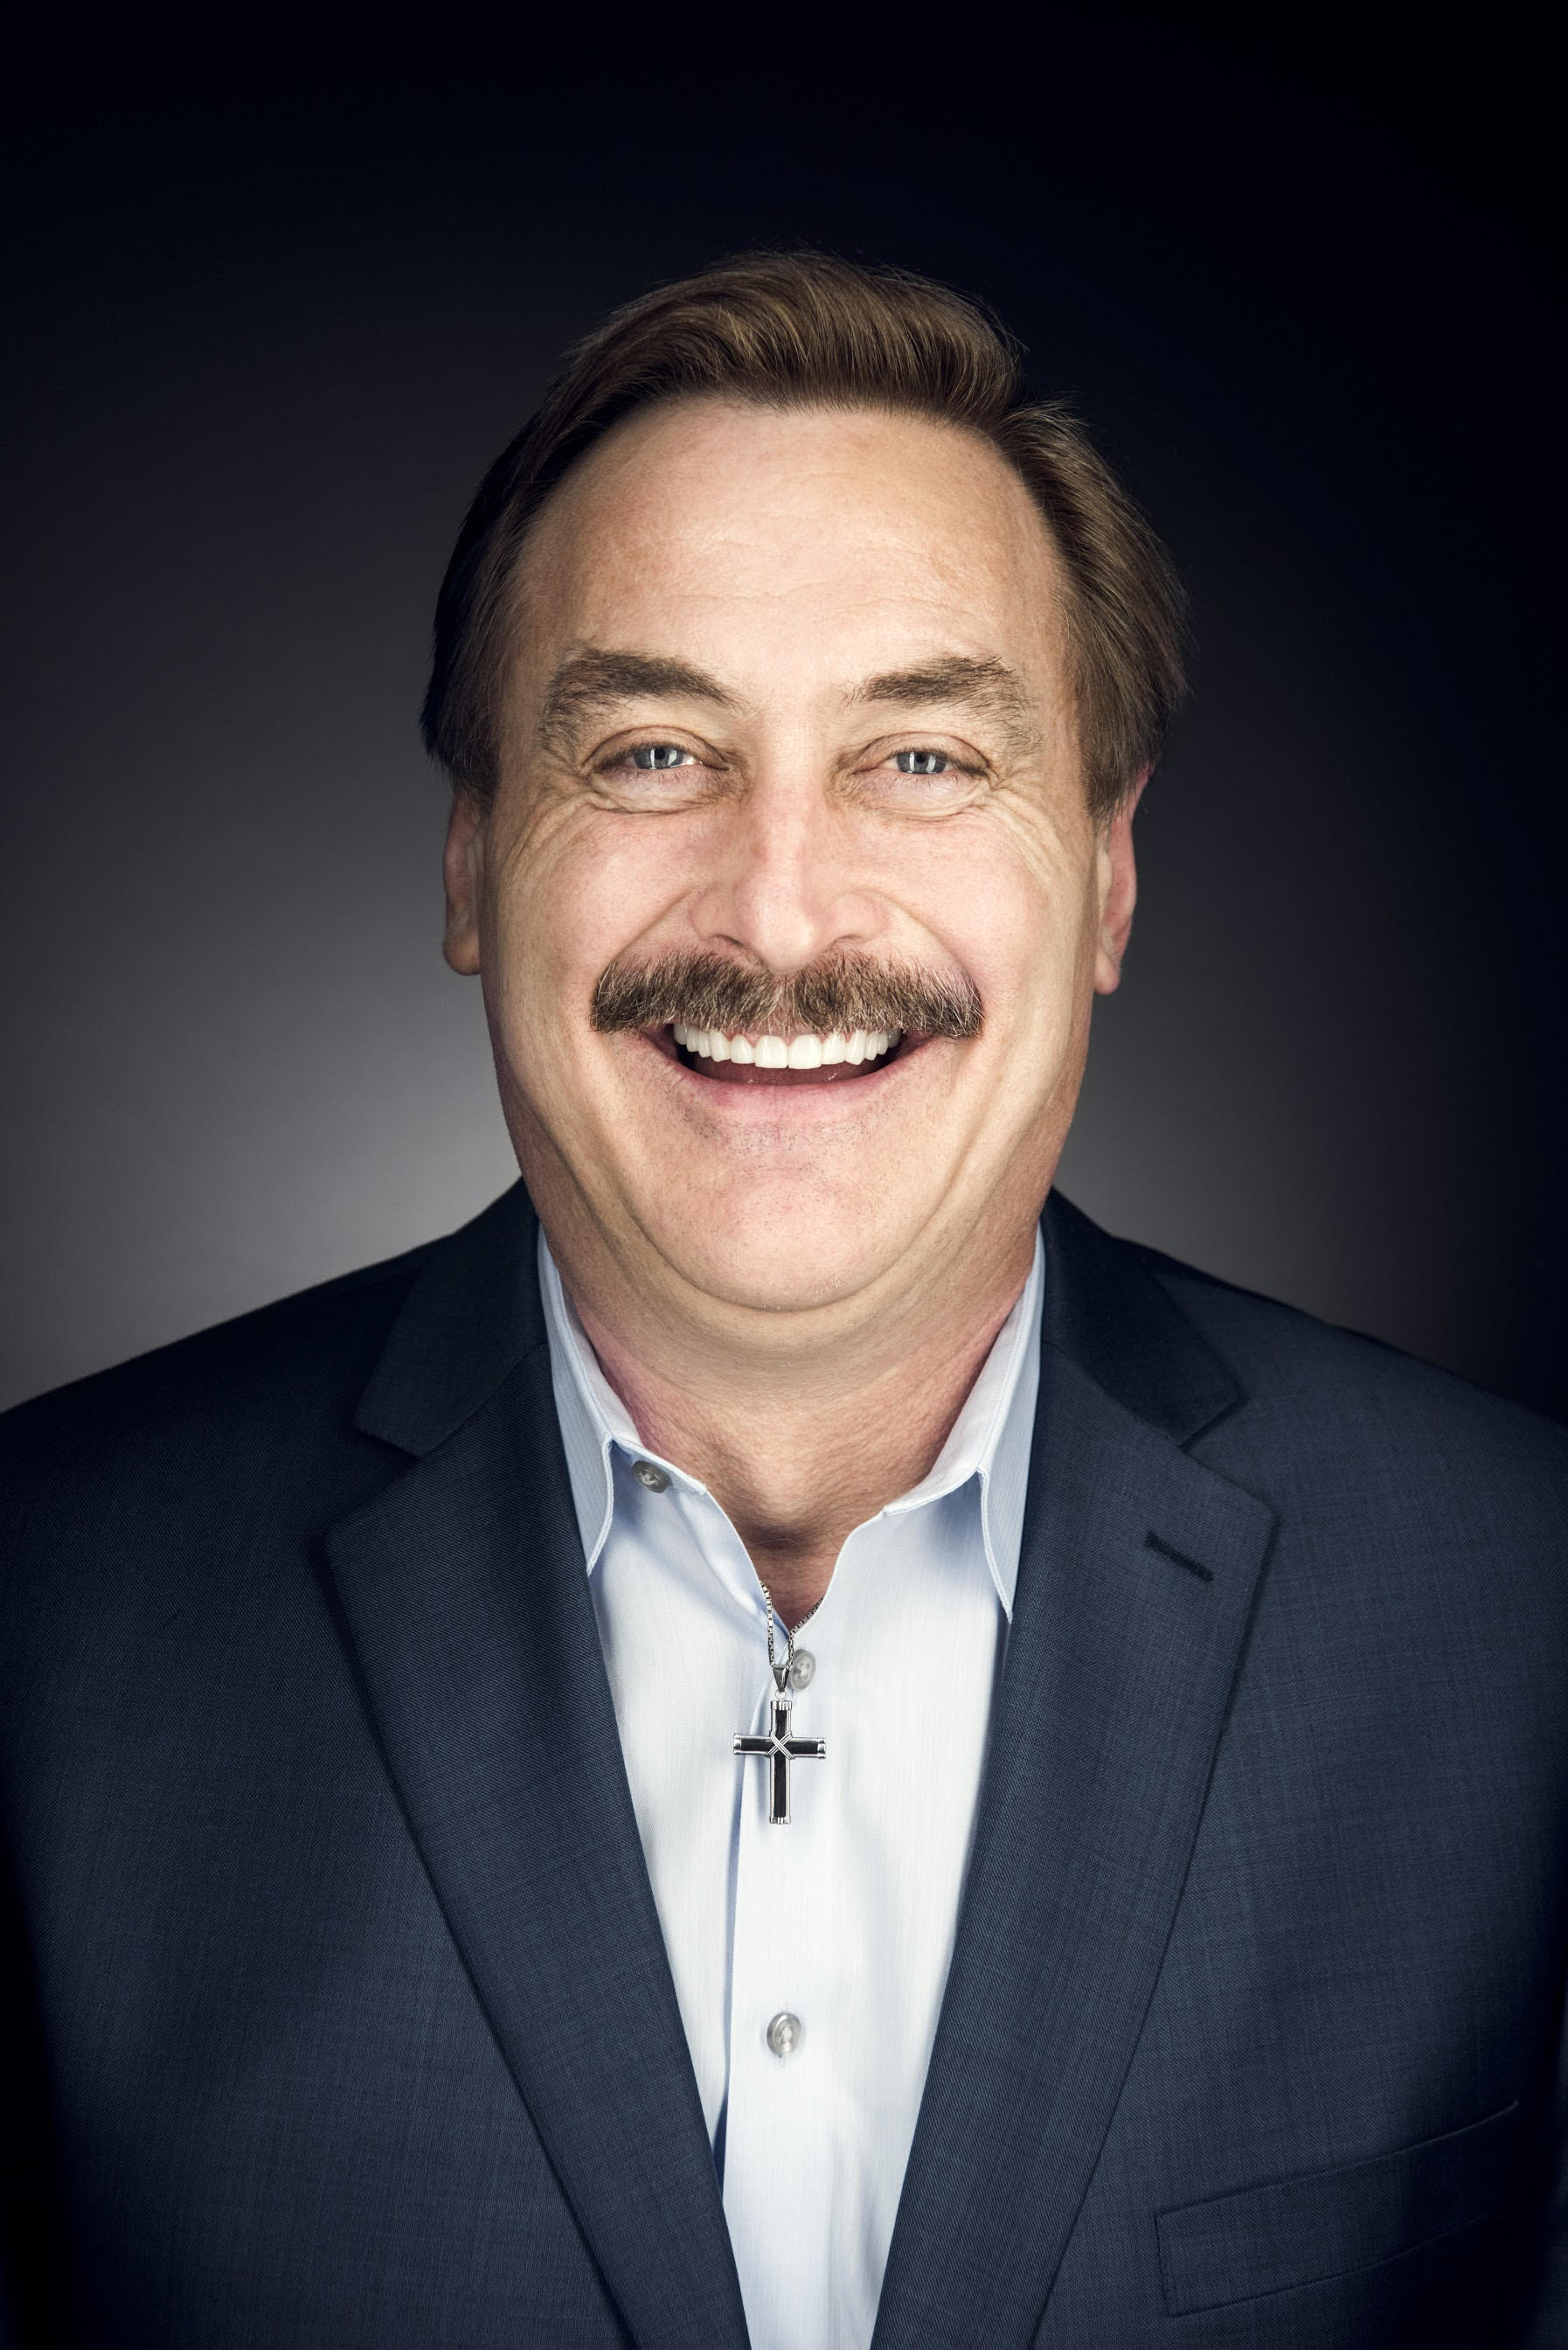 Mike Lindell gives his POV on the 2020 election